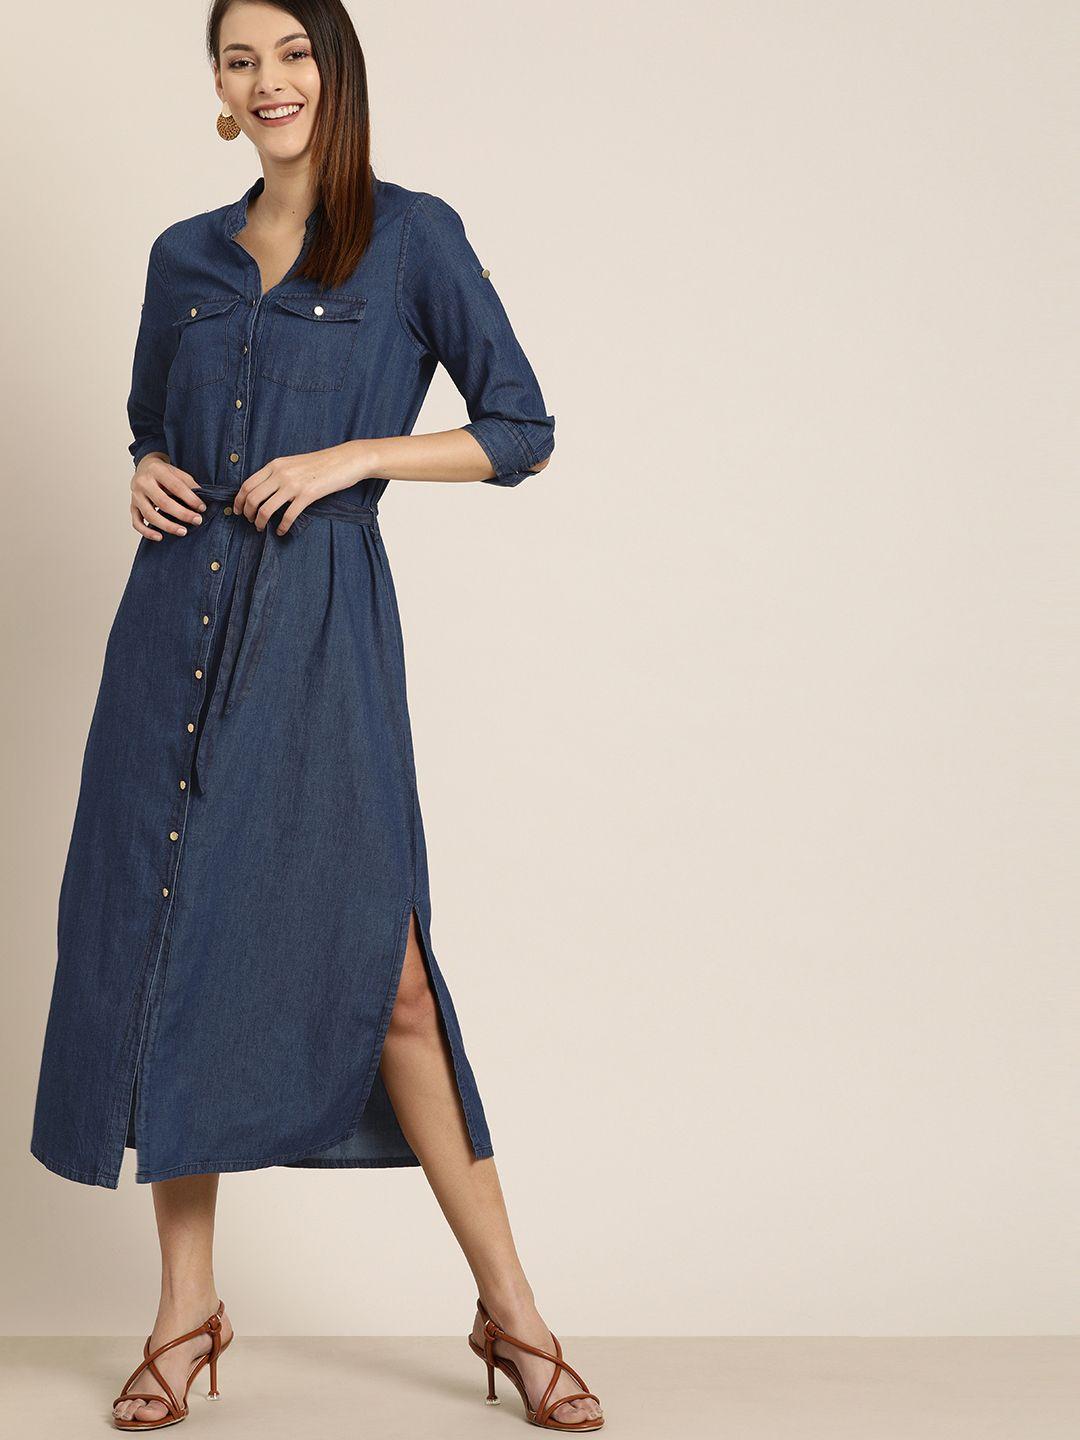 all about you blue fit and flare denim dress